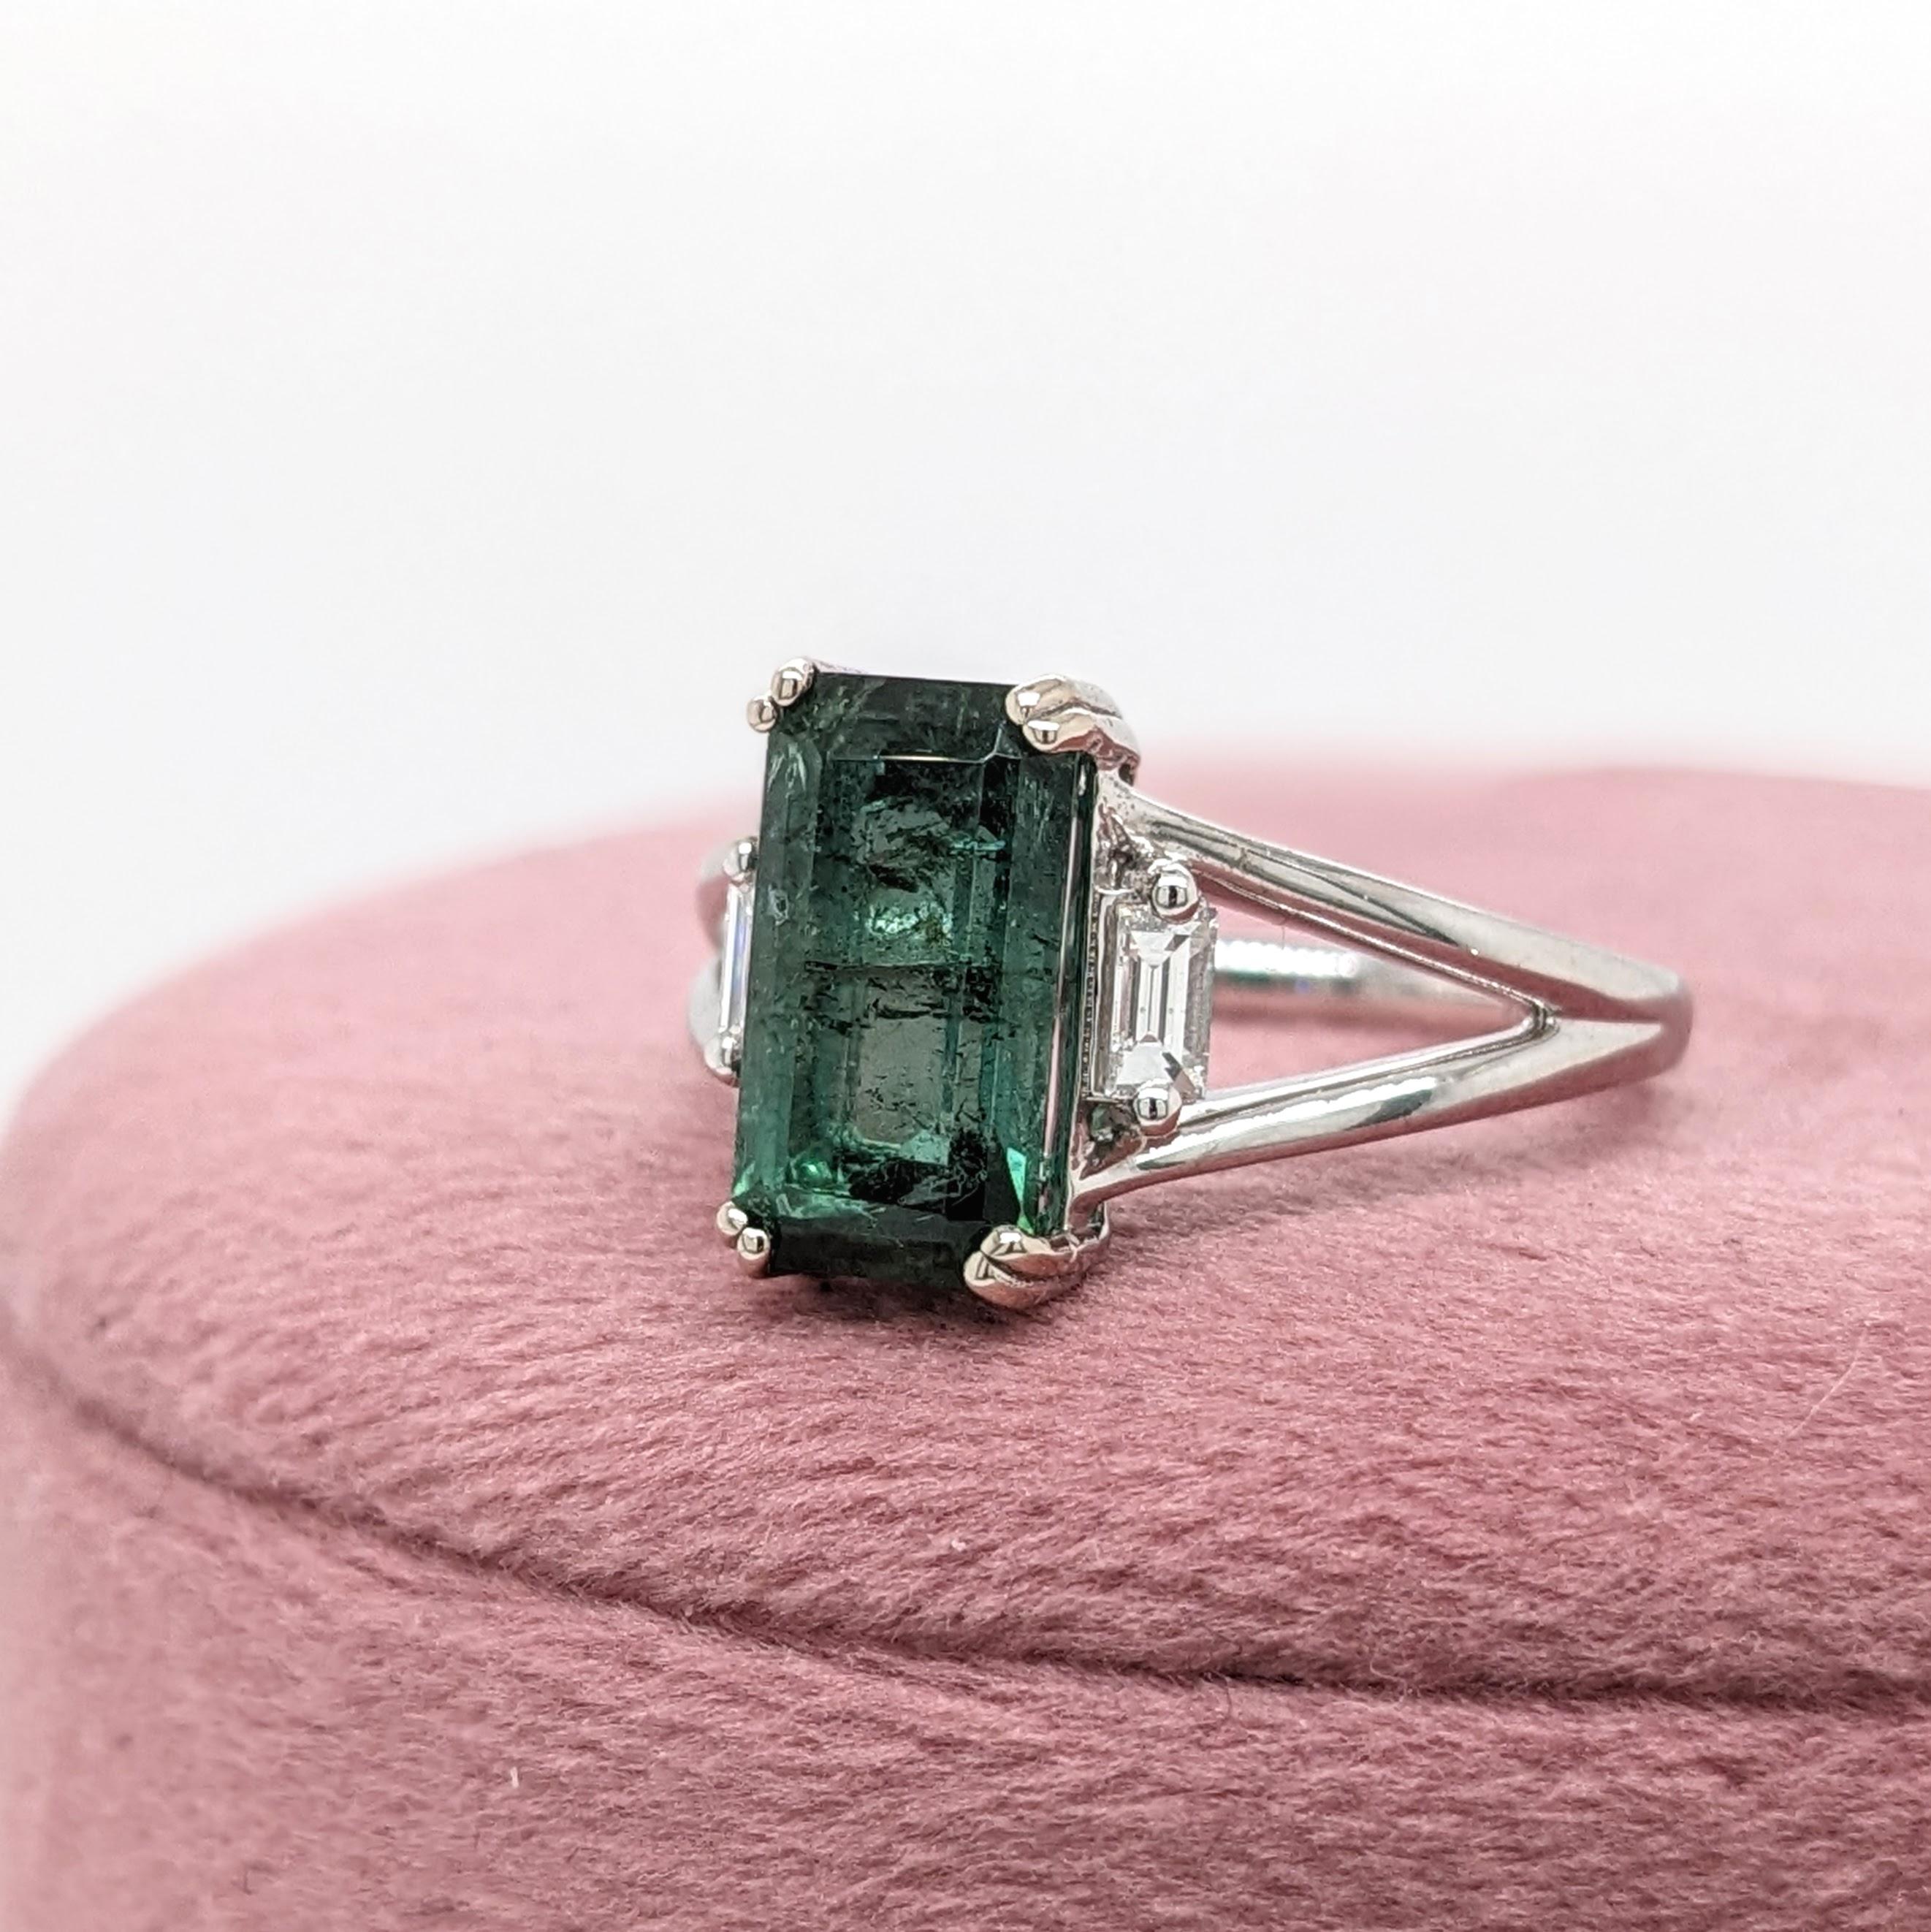 2.57ct Tourmaline w Diamond Accents in 14K Solid White Gold Emerald Cut 10x6mm In New Condition For Sale In Columbus, OH